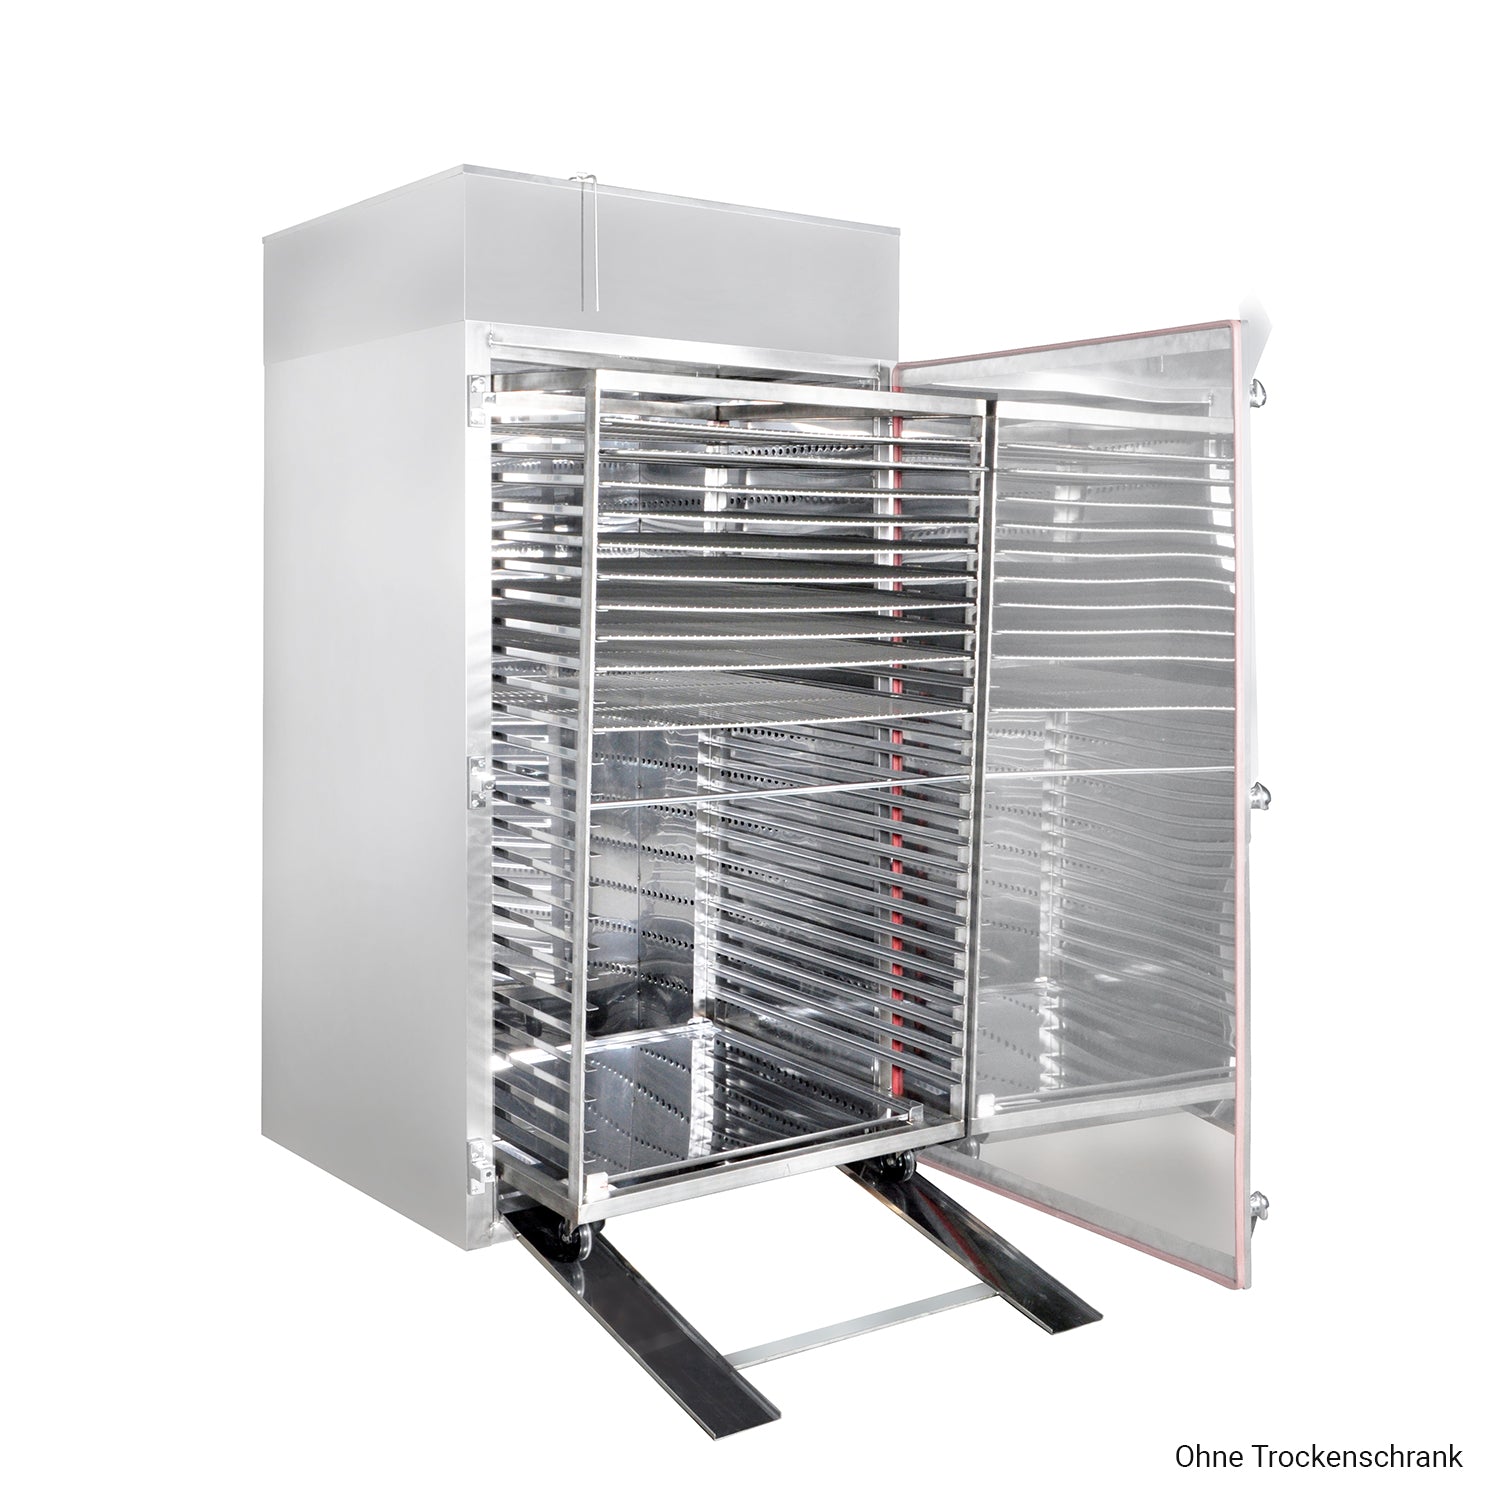 Beelonia trolley for drying cabinets